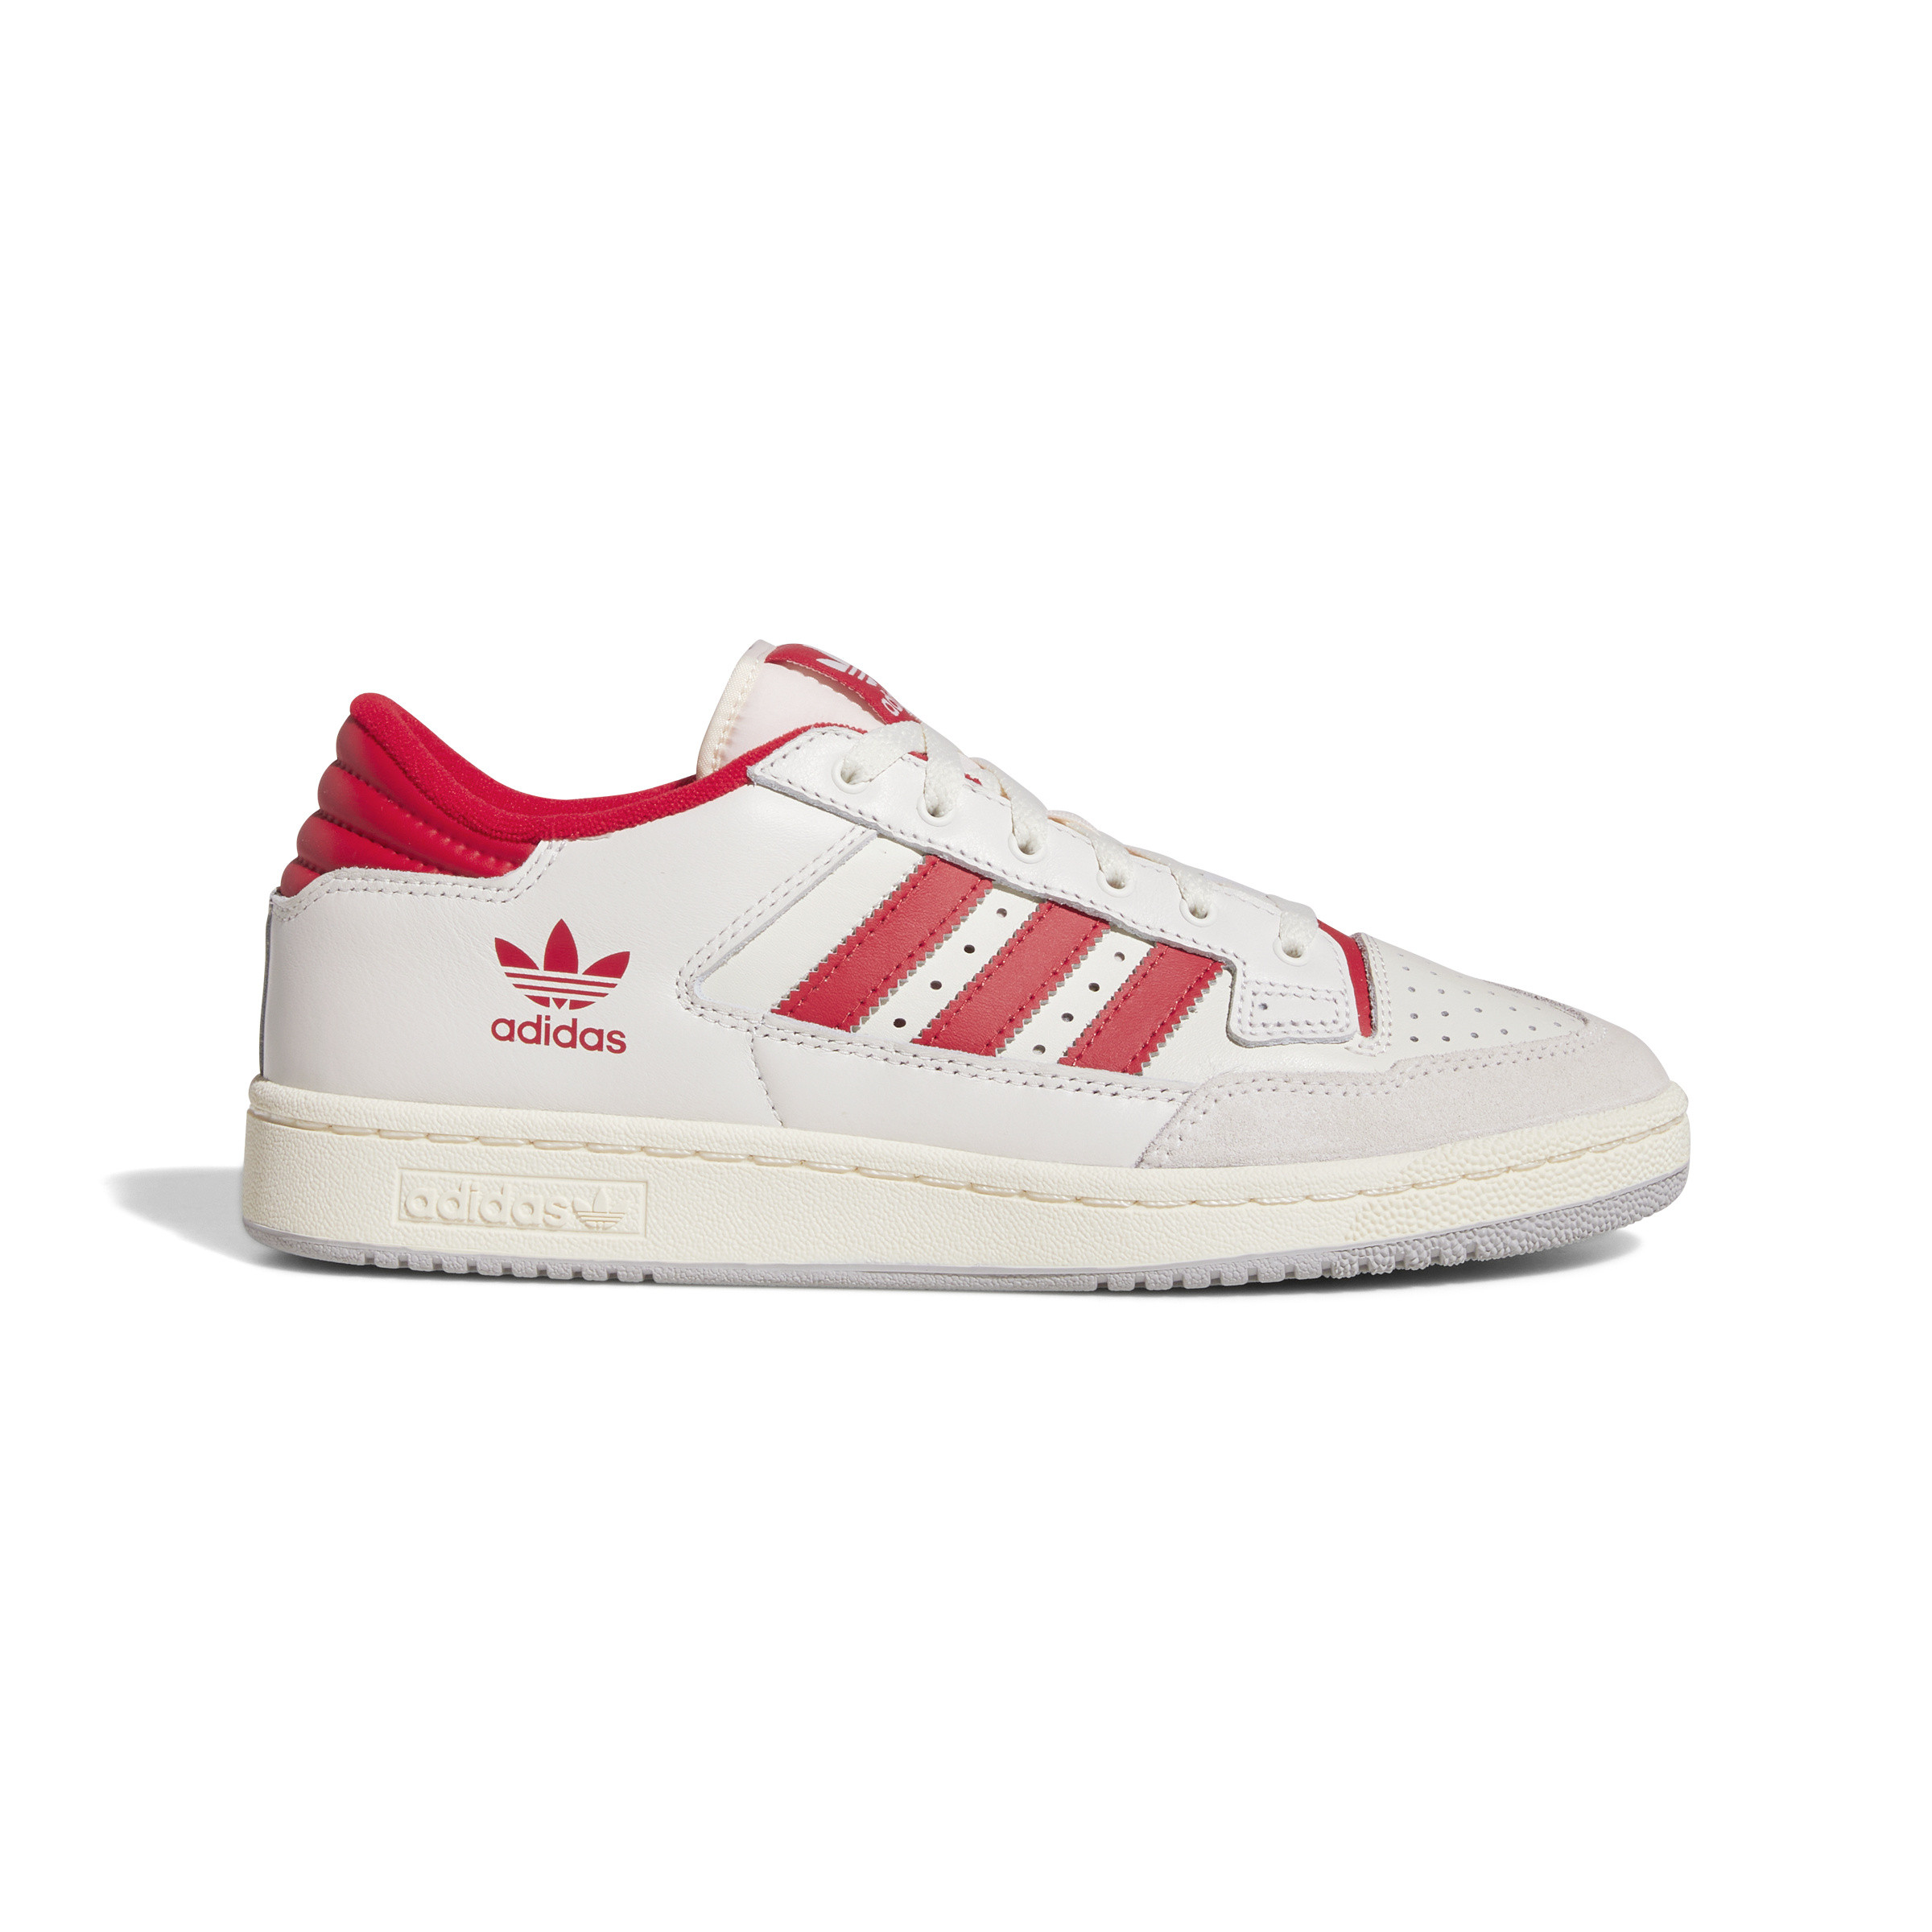 Adidas - Centennial 85 low shoes, White, large image number 0